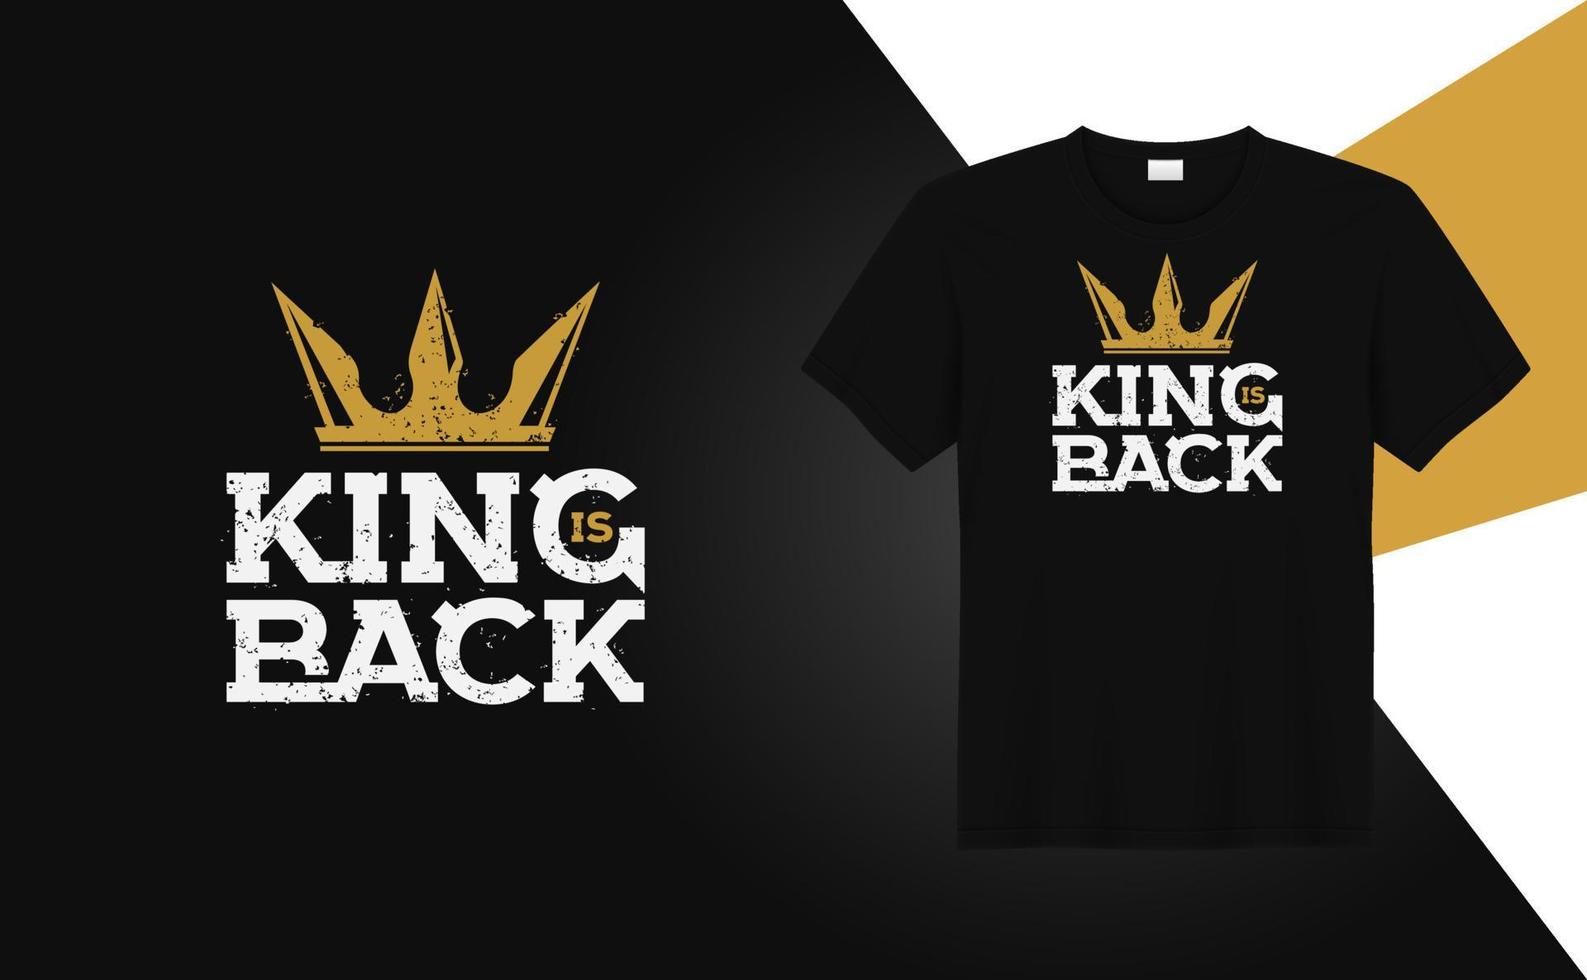 King back t-shirt design with vintage crown illustration  for t-shirt printing, clothing fashion, Poster, Wall art. Vector illustration art for t-shirt.